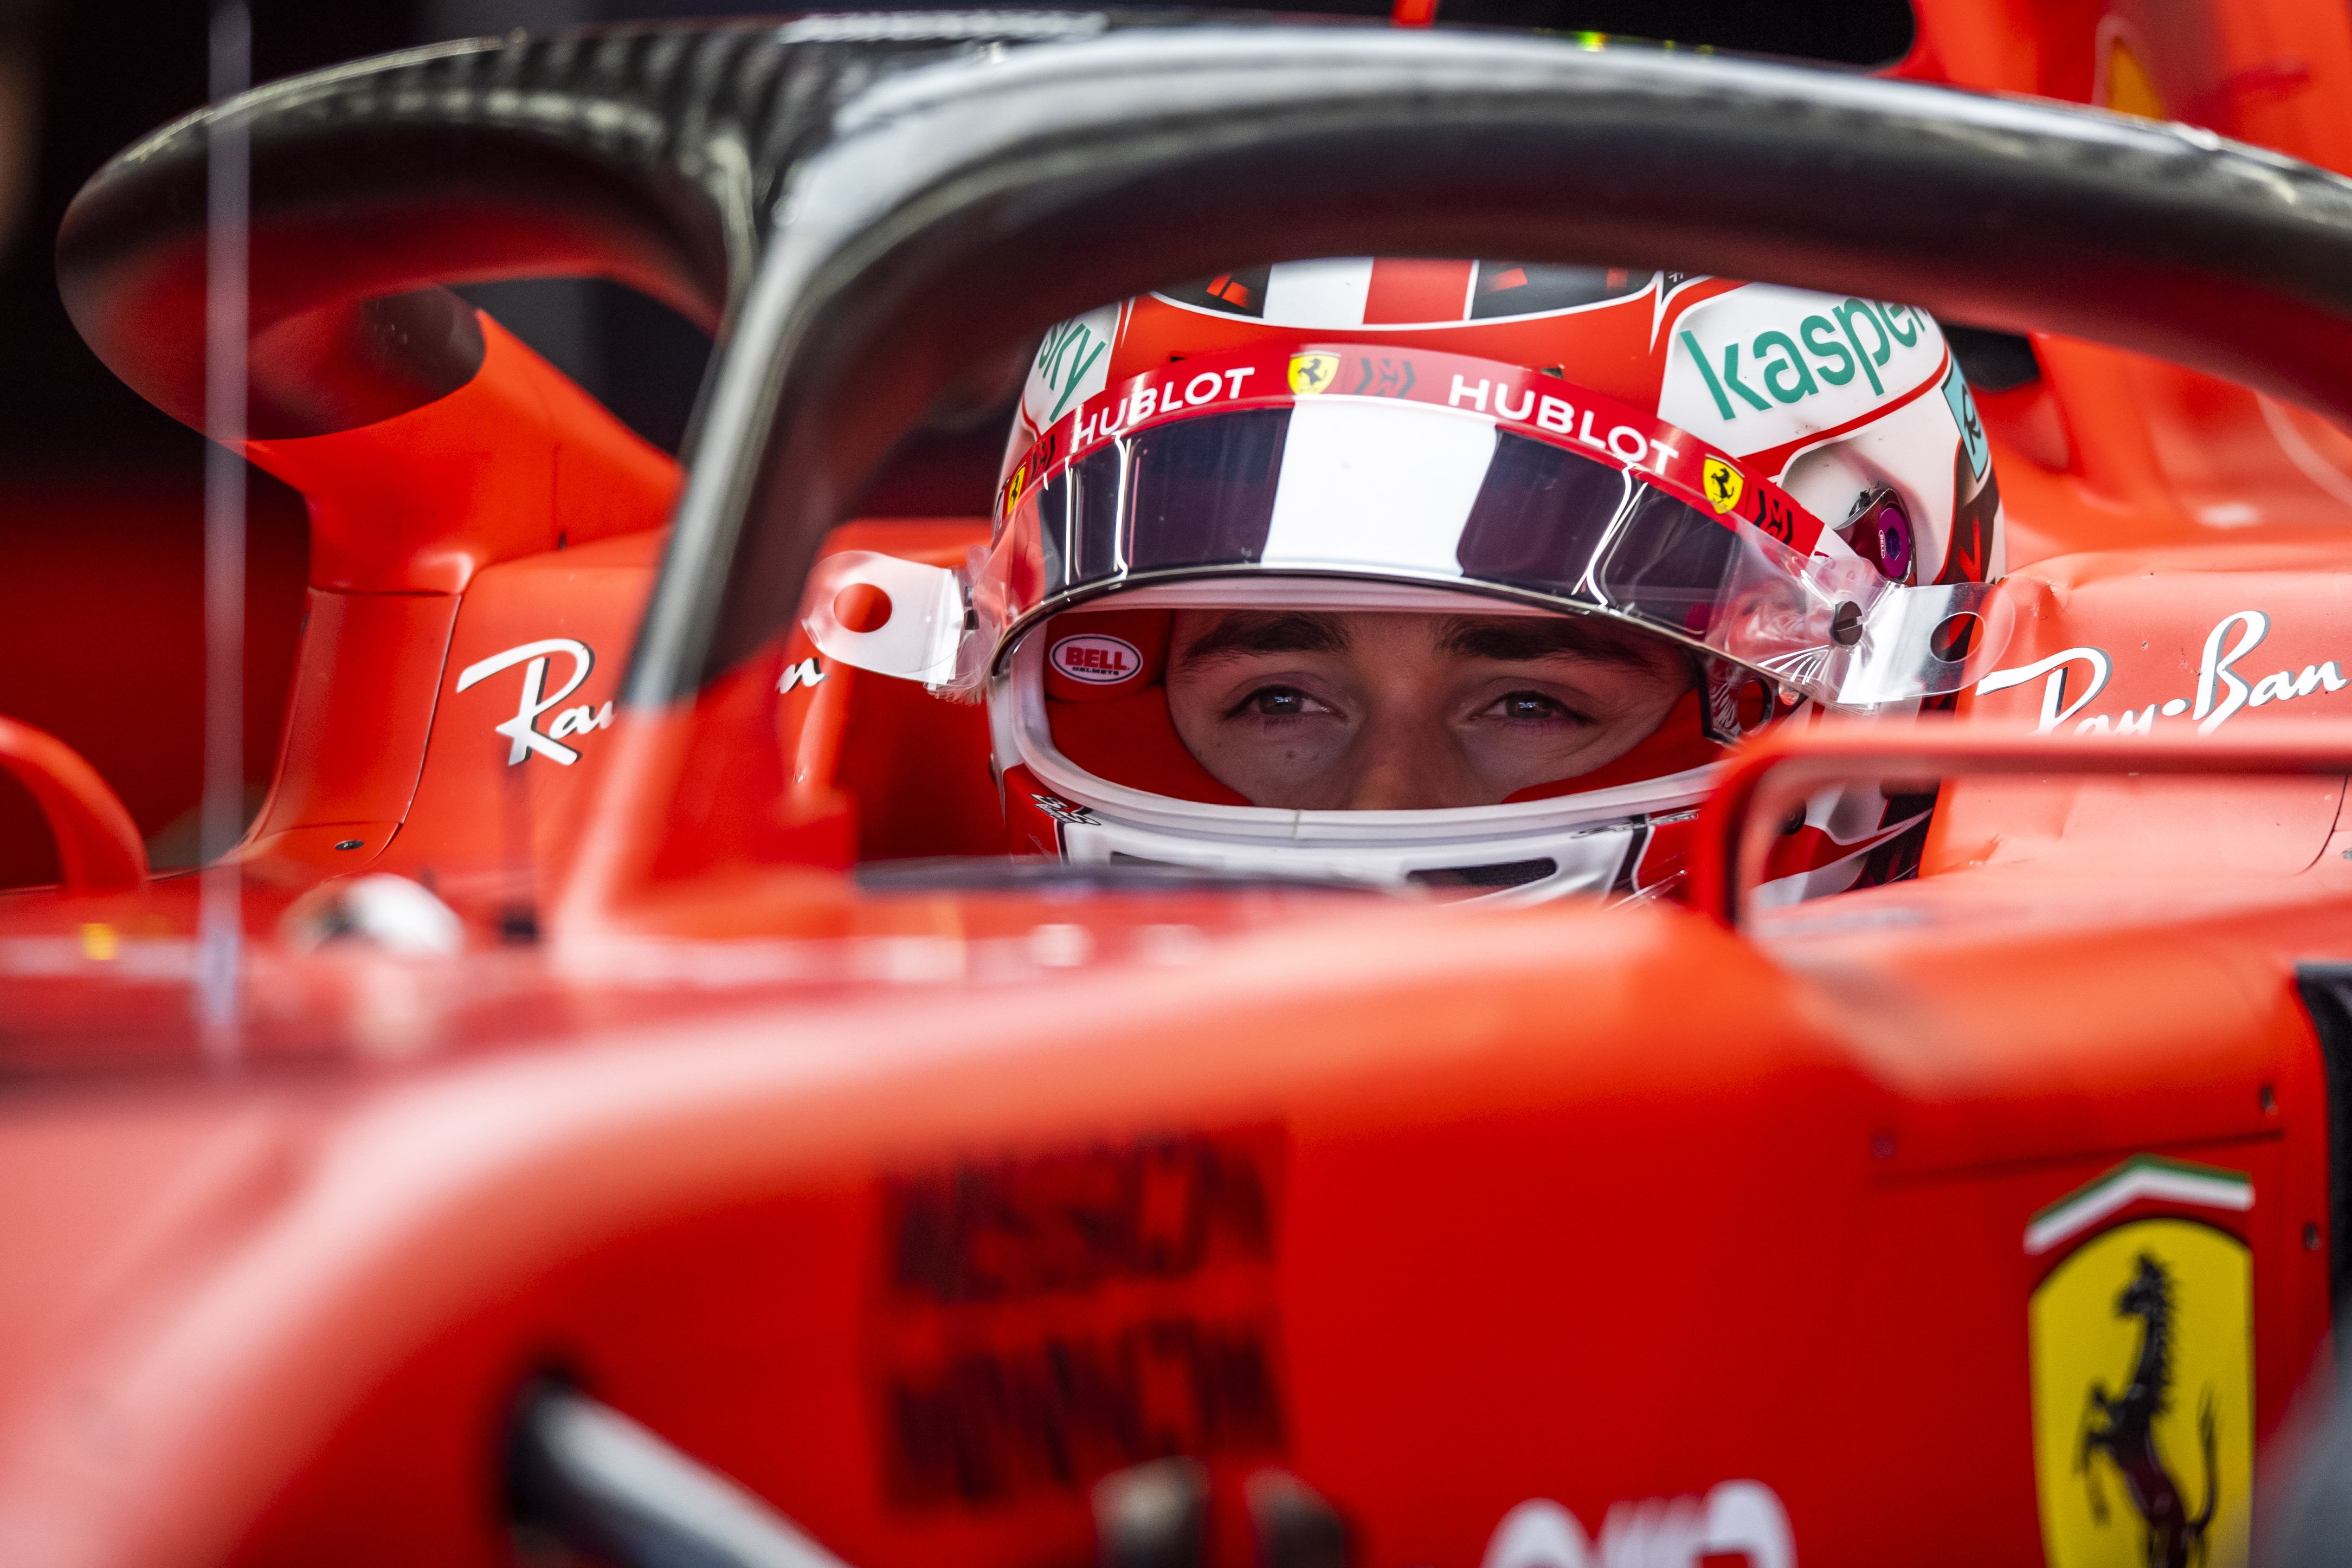 Charles Leclerc in a garage during F1 Winter Testing on Day 1, February 19, 2020 | Photo: Getty Images